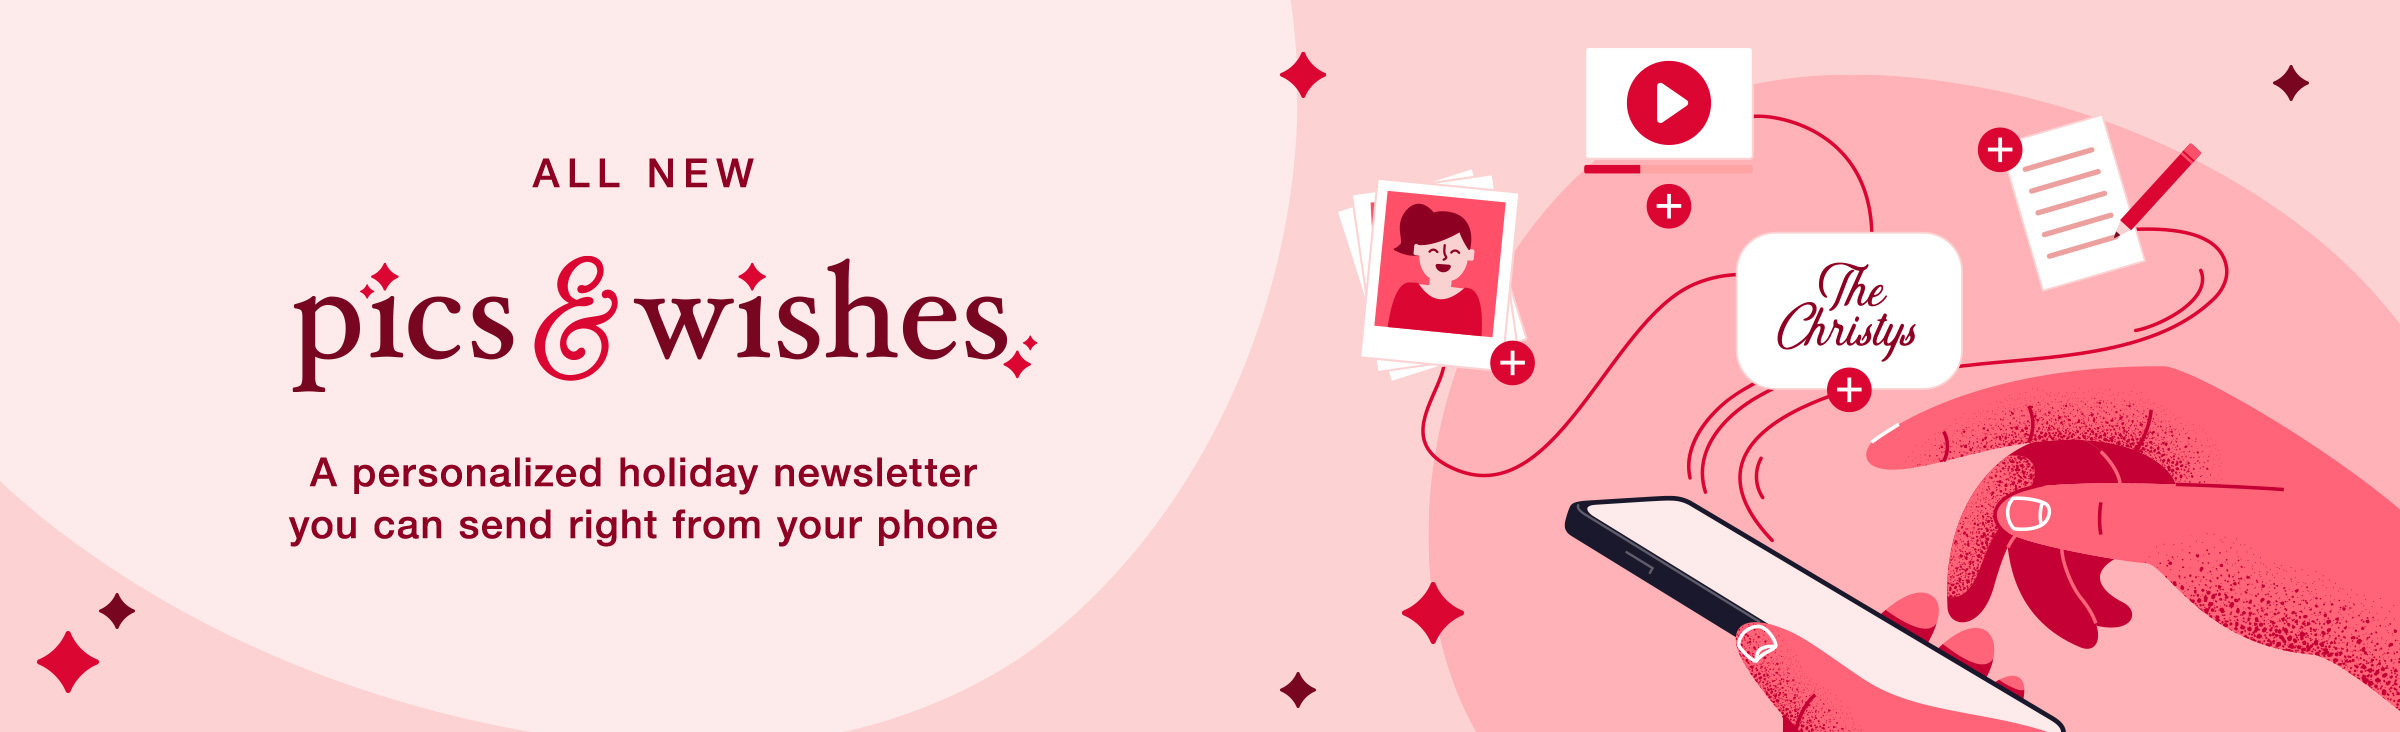 Pics & Wishes - a personalize holiday newsletter you can send right from your phone